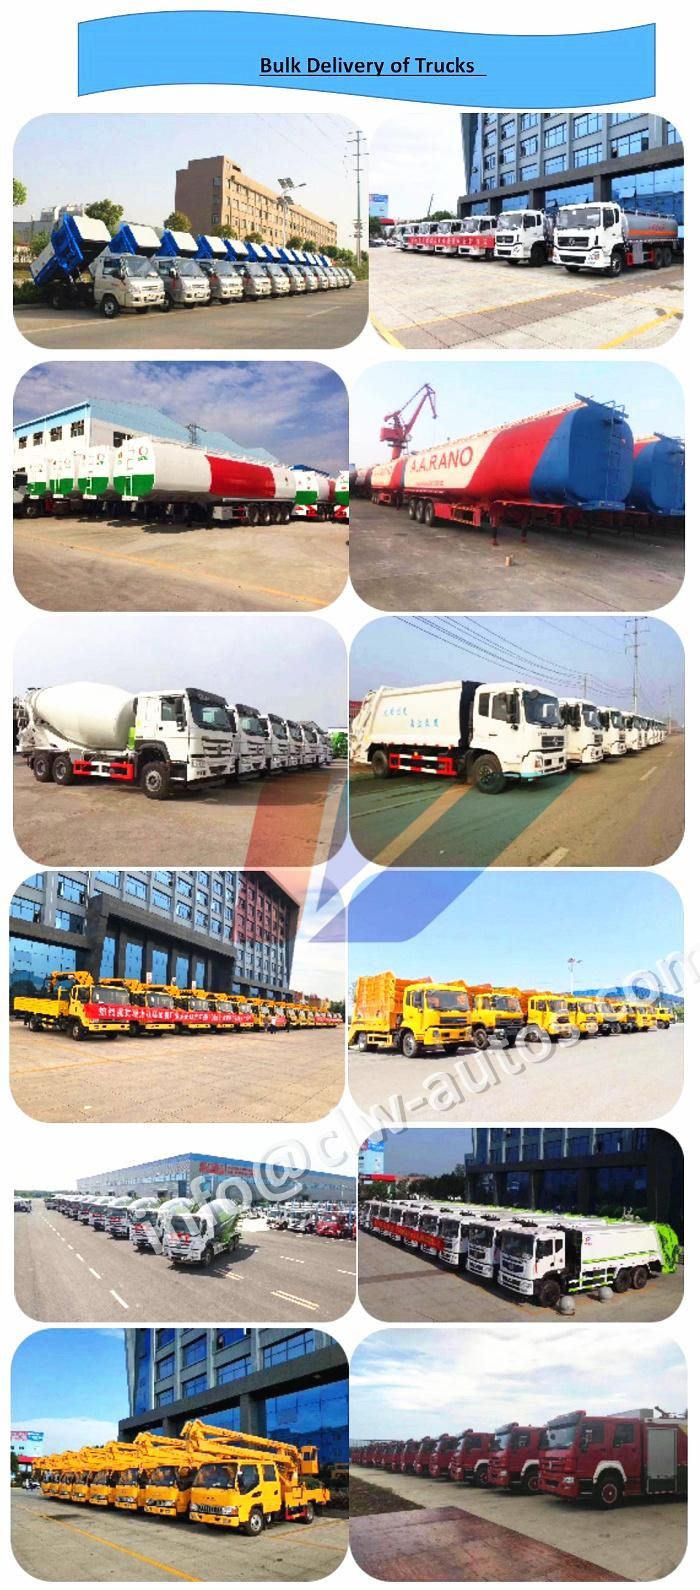 Foton 6*4 15tons Roll off Garbage Truck 20tons Hook Lifting Garbage Collection Truck for Sale